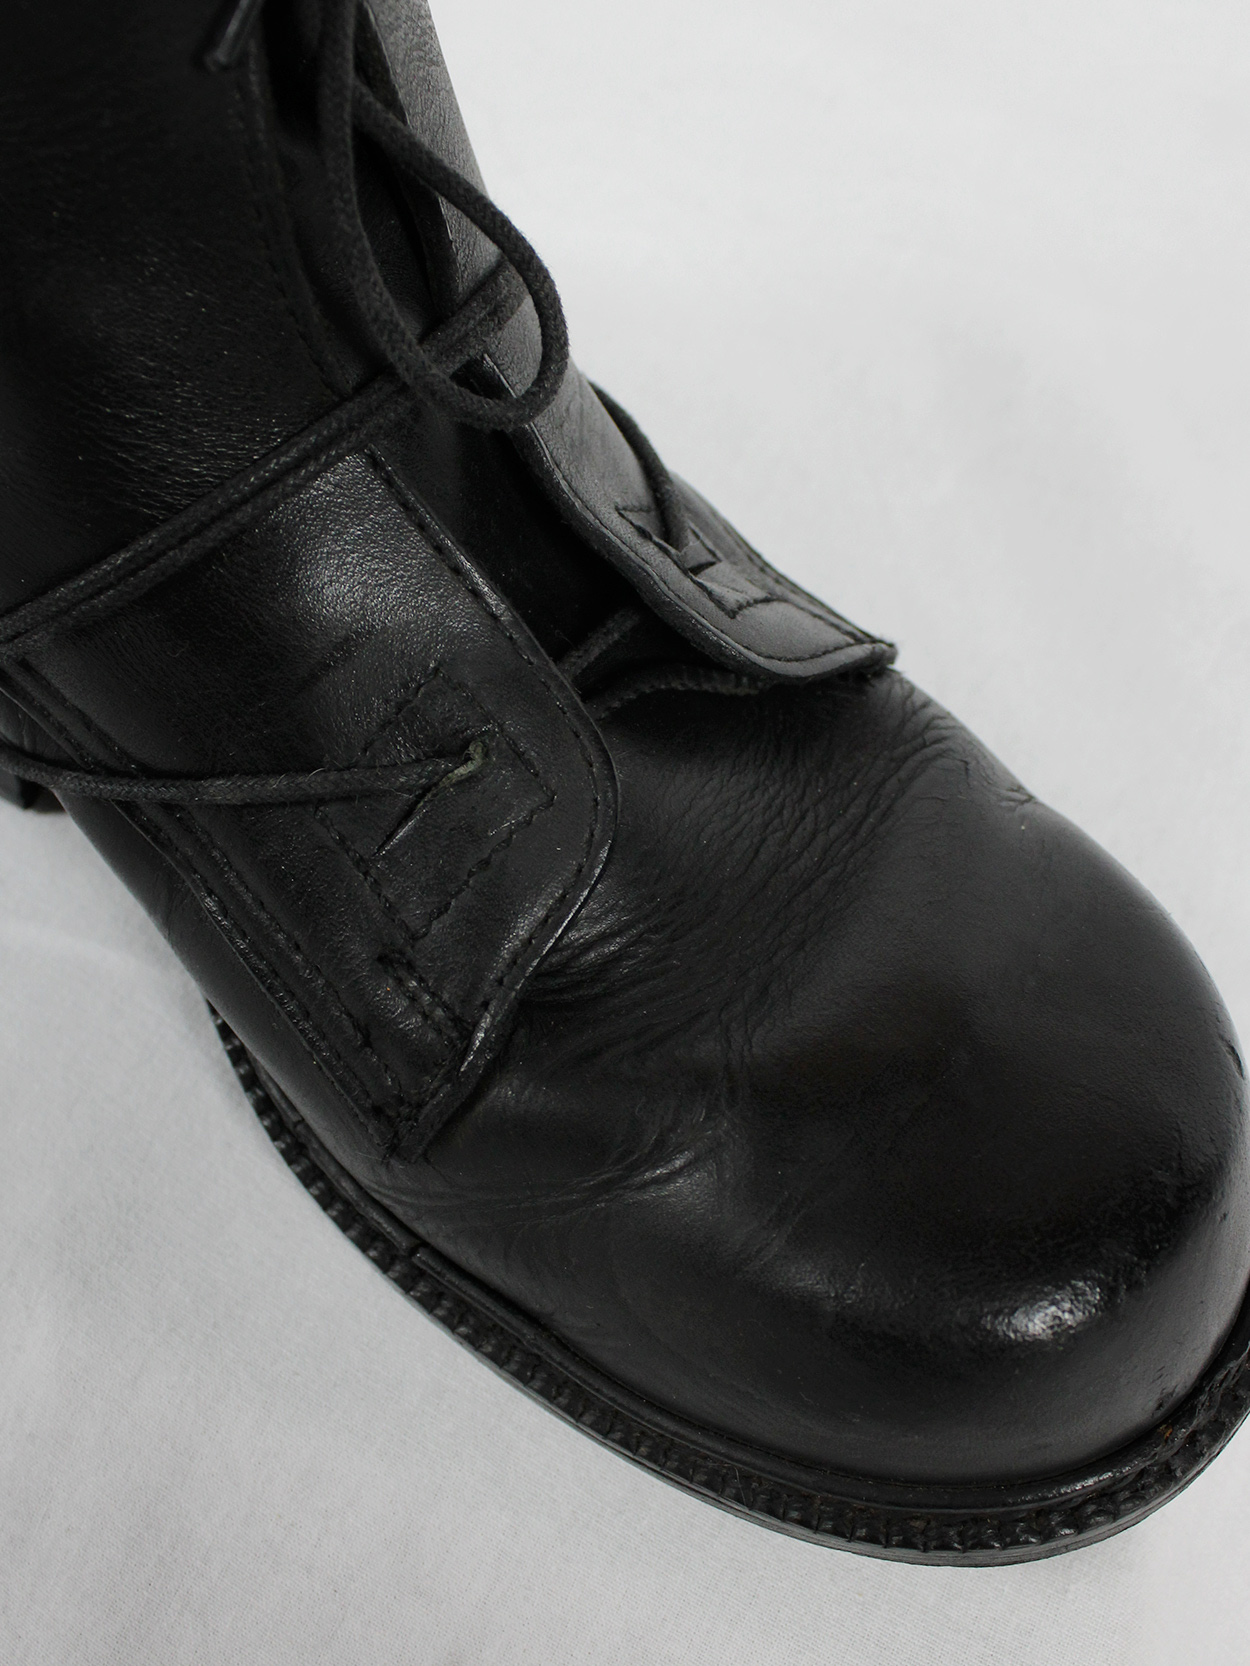 Dirk Bikkembergs black tall boots with laces through the soles (21)